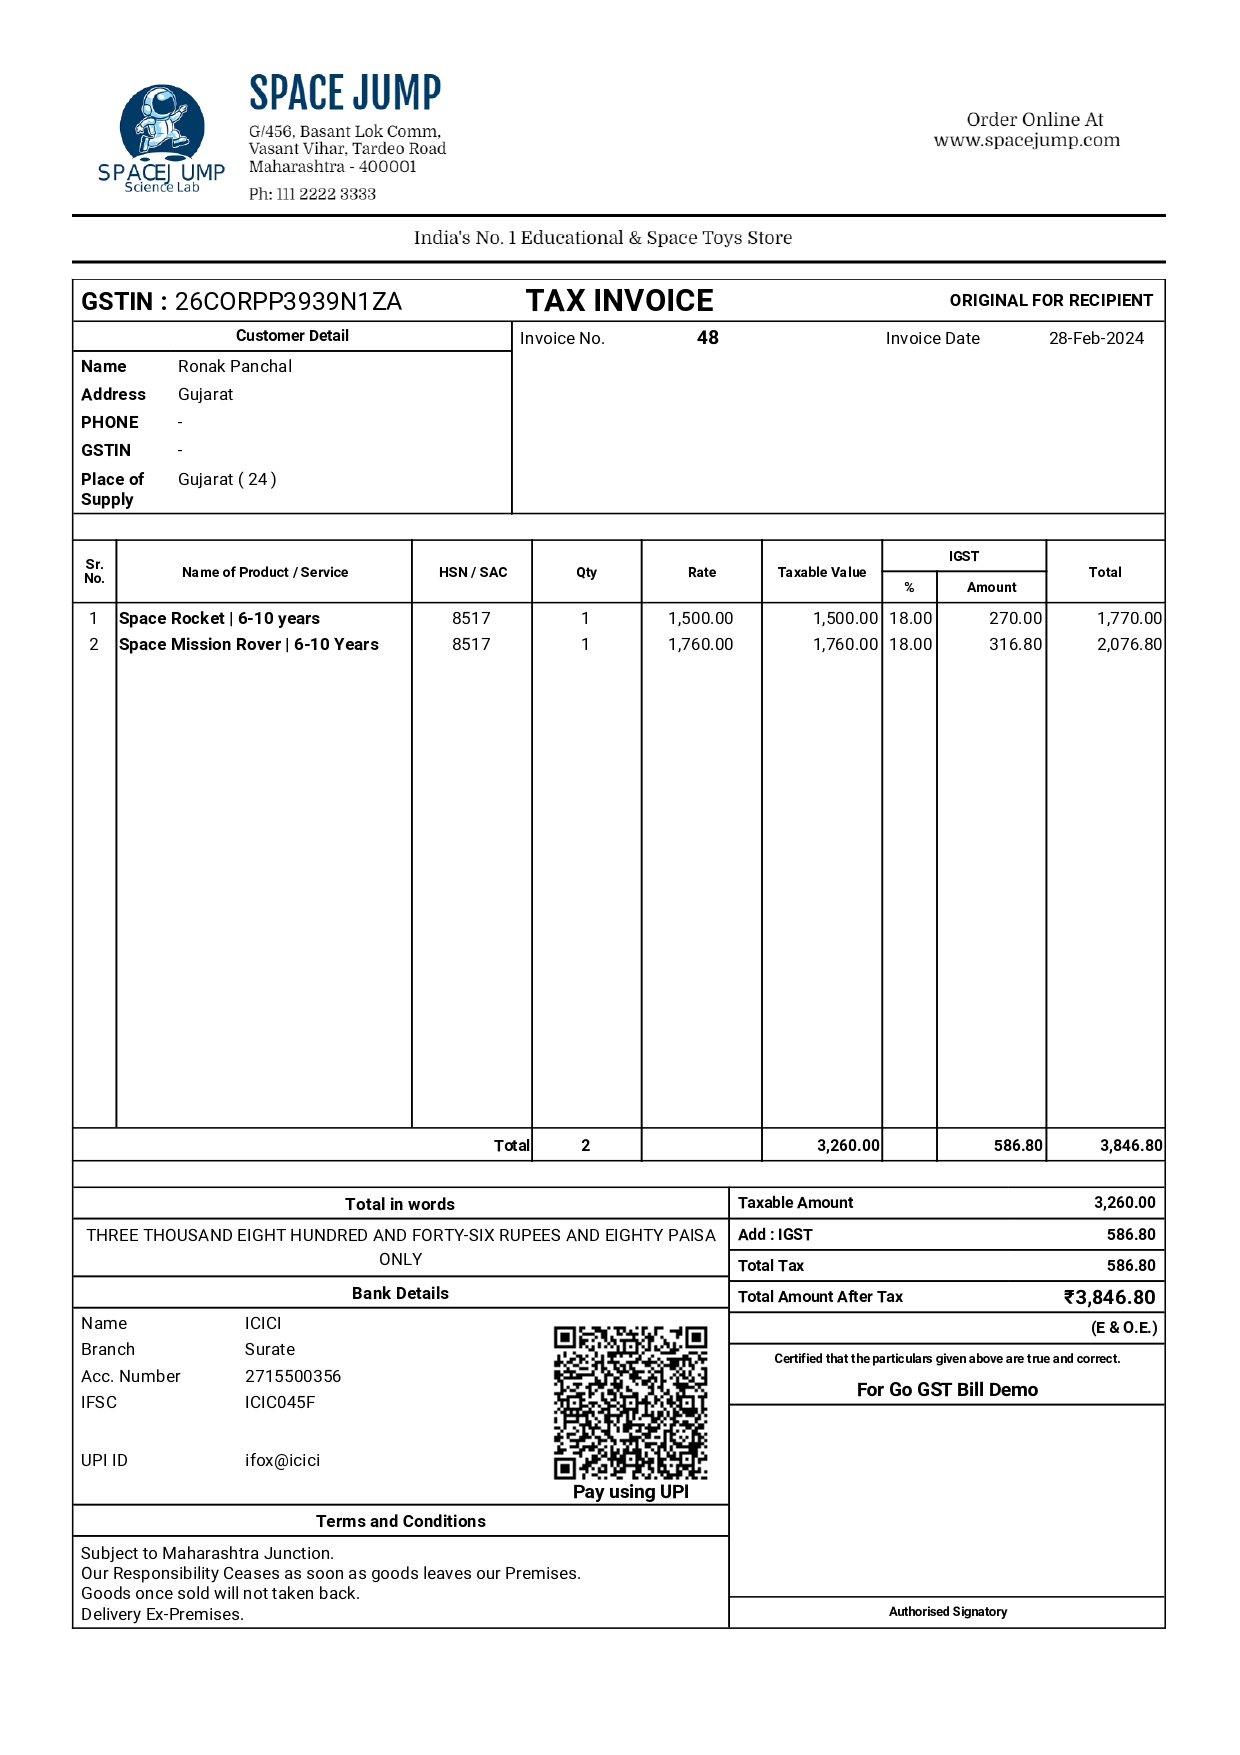 GST Invoice Format For Startups